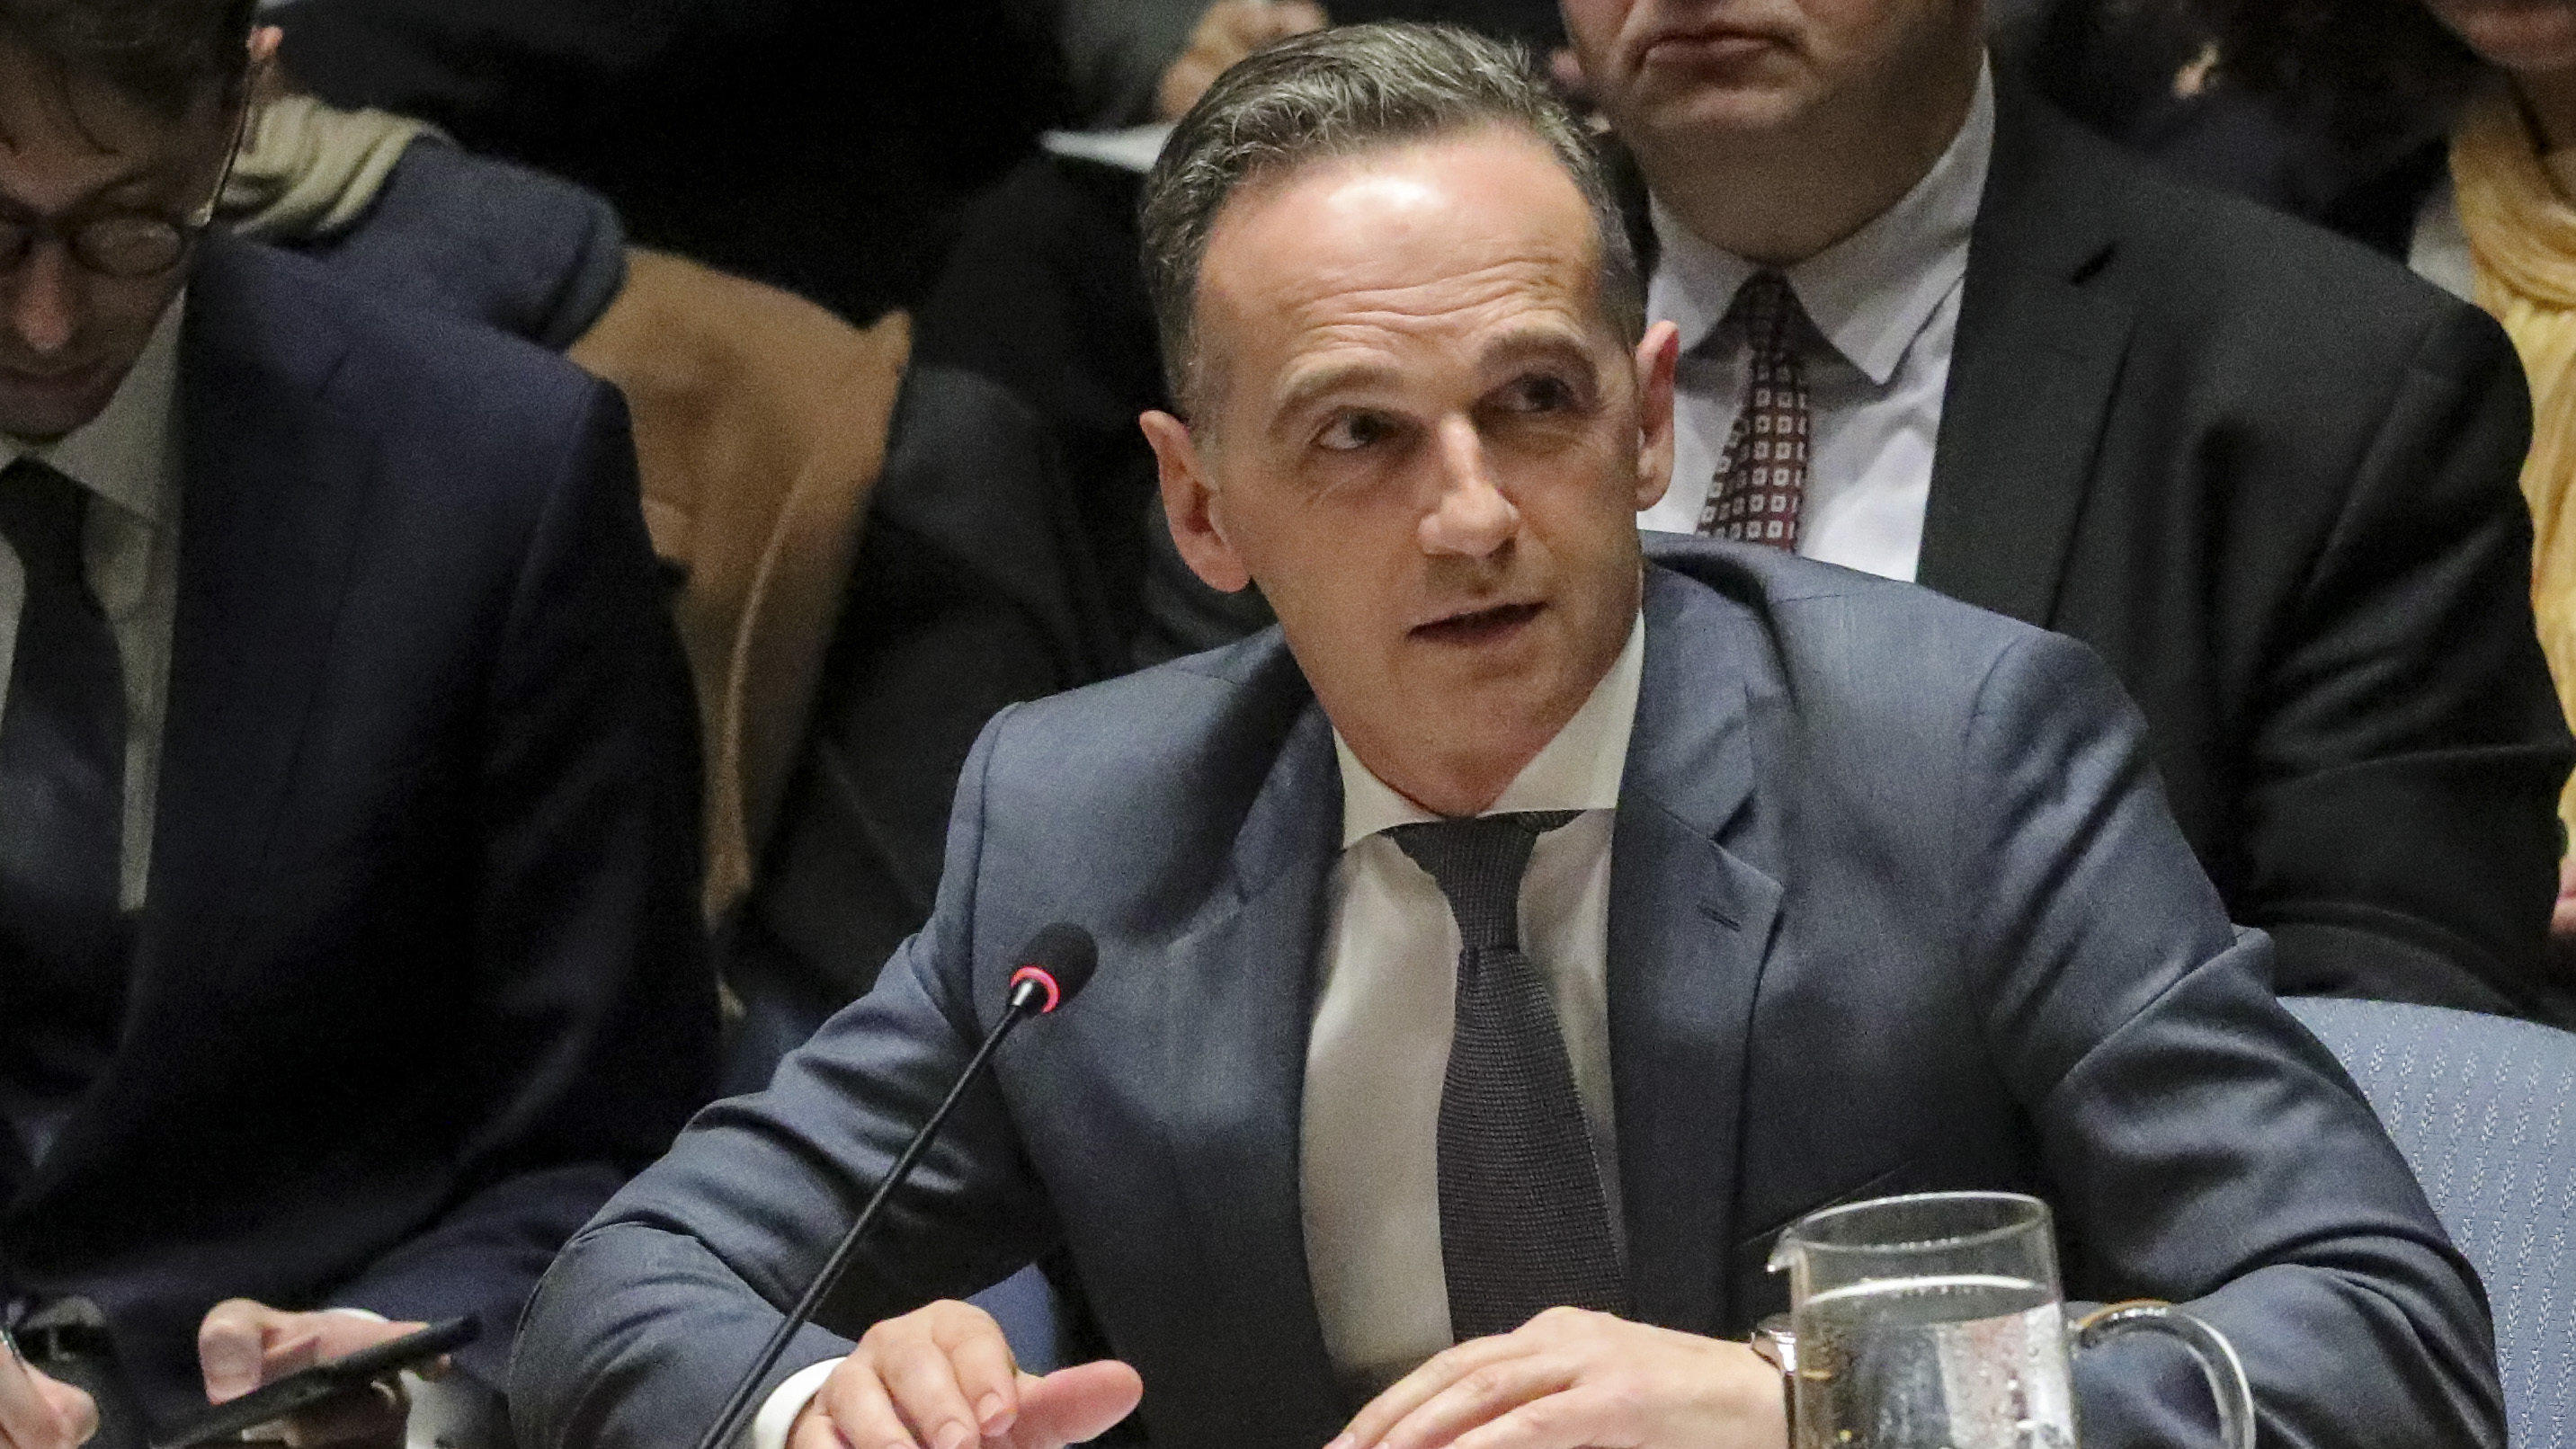 Germany's Foreign Minister Heiko Maas speaks, during a meeting on the nuclear non-proliferation treaty in the United Nations Security Council, Wednesday, Feb. 26, 2020, at U.N. headquarters. (AP Photo/Bebeto Matthews)